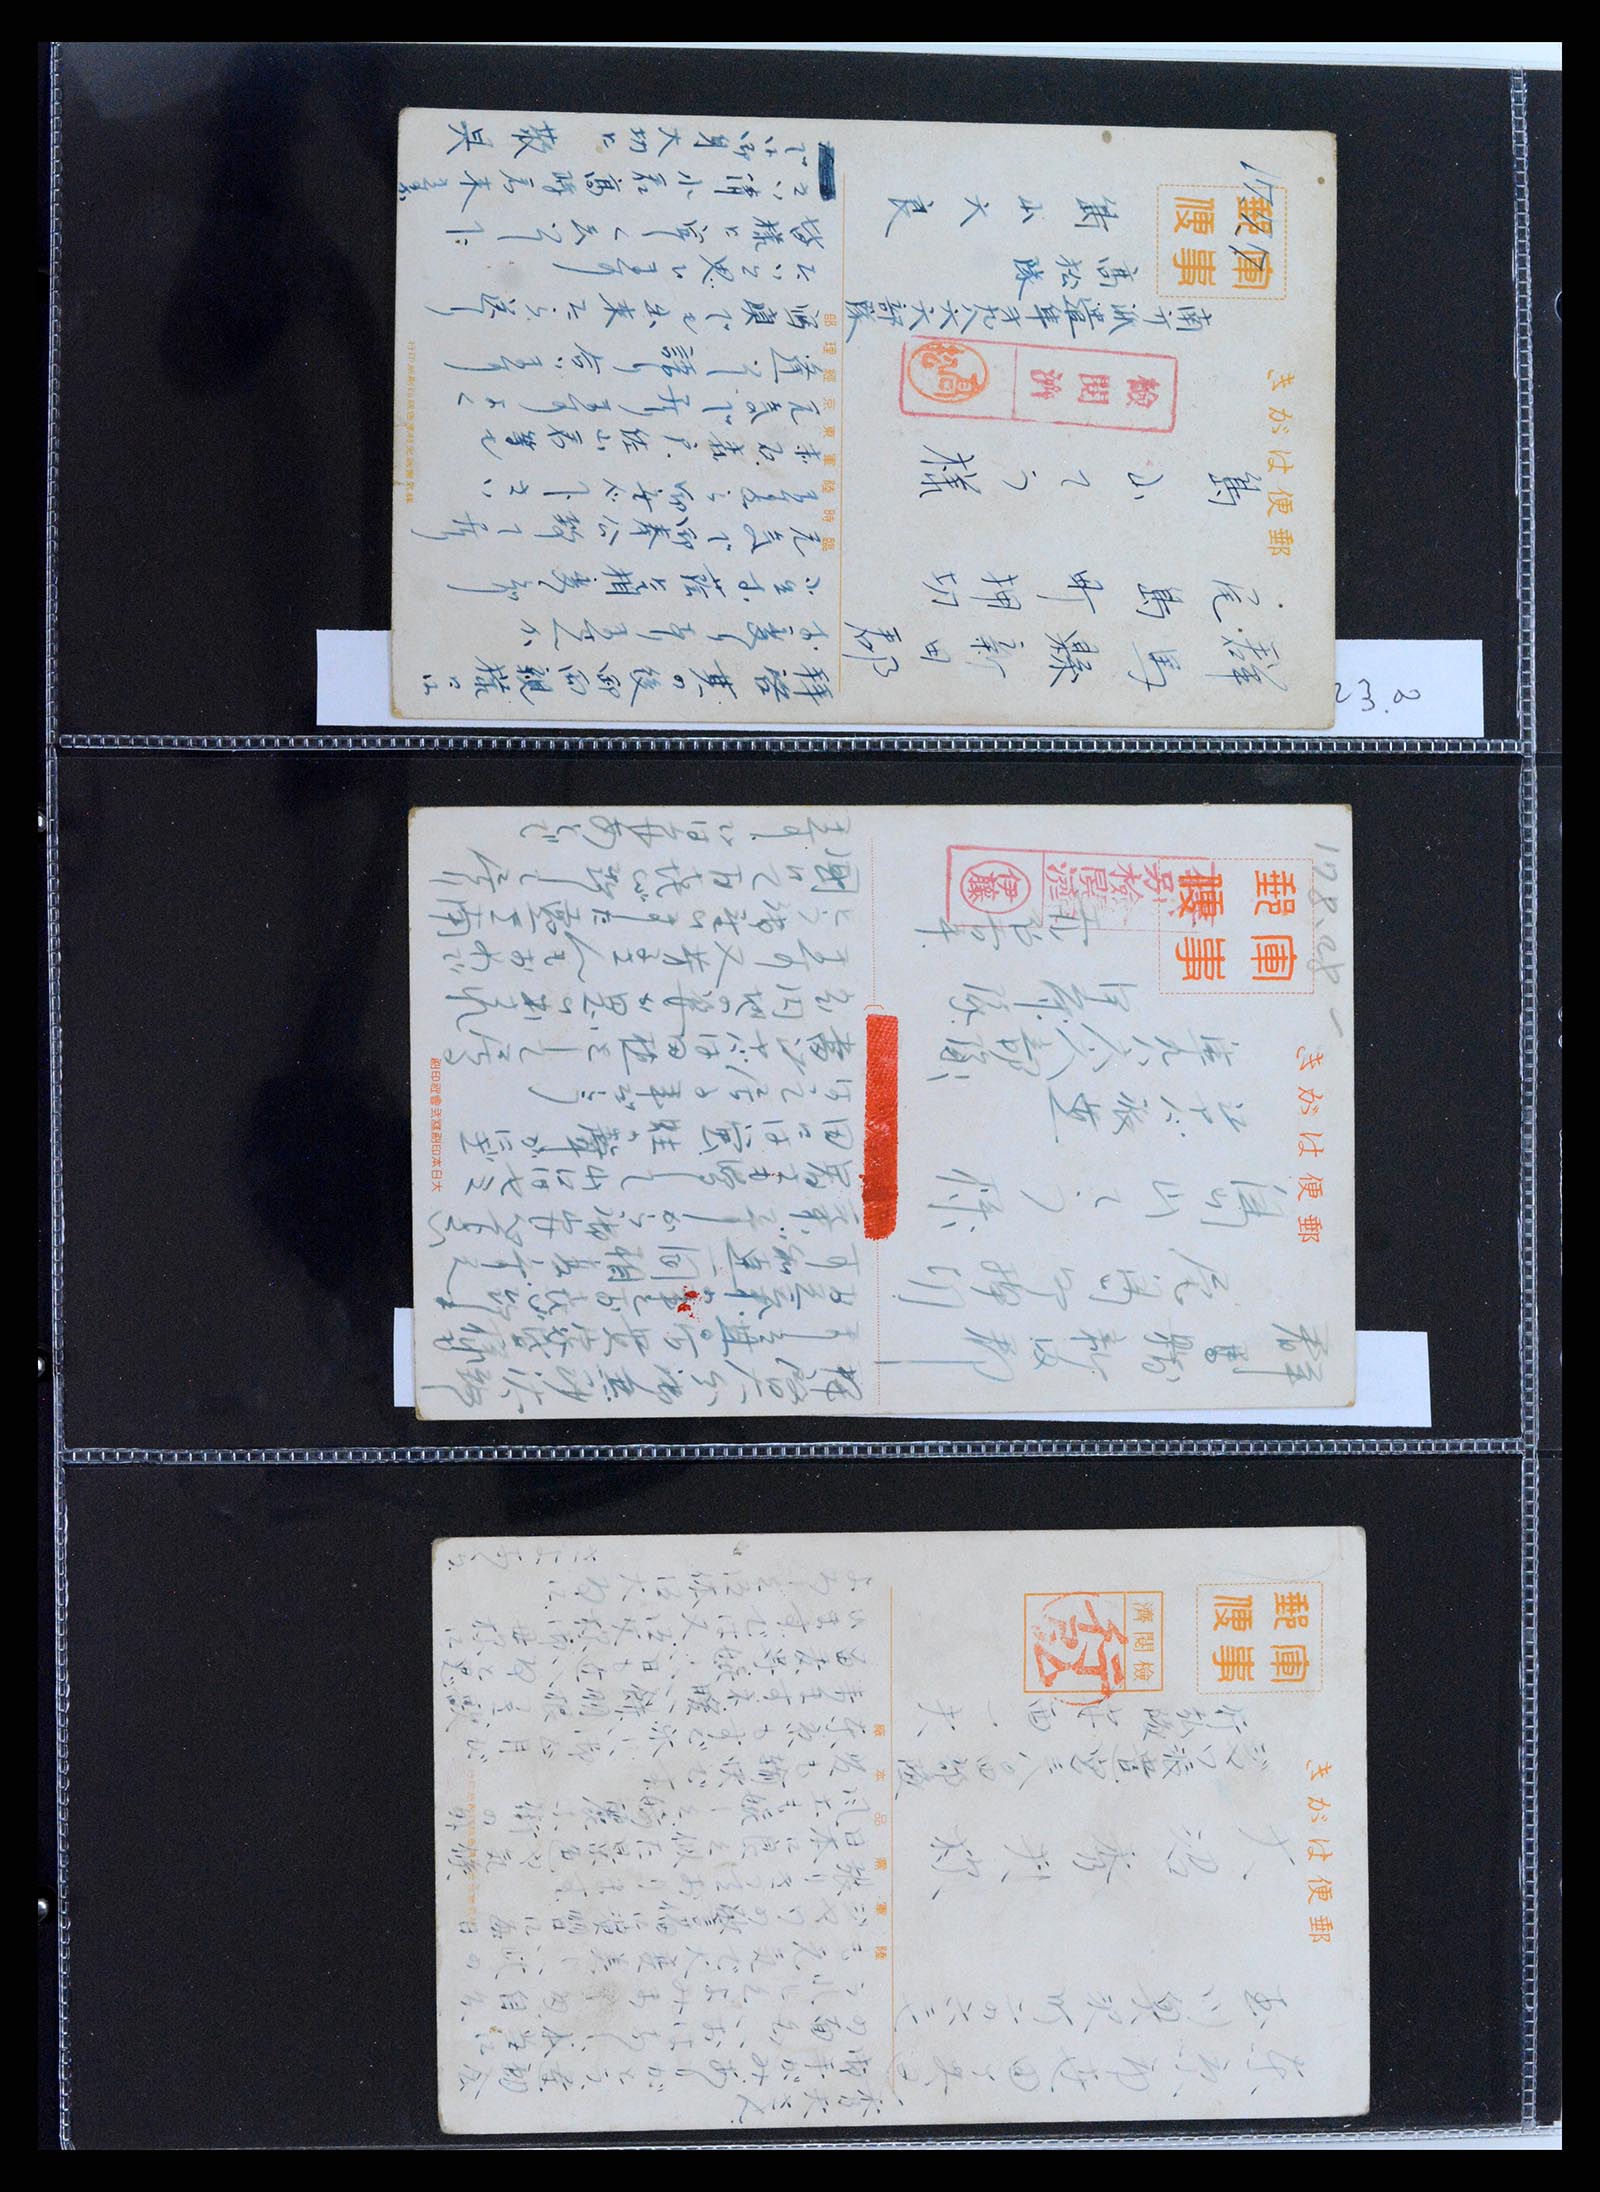 37423 013 - Stamp collection 37423 Dutch Indies Japanese occupation covers 1942-1945